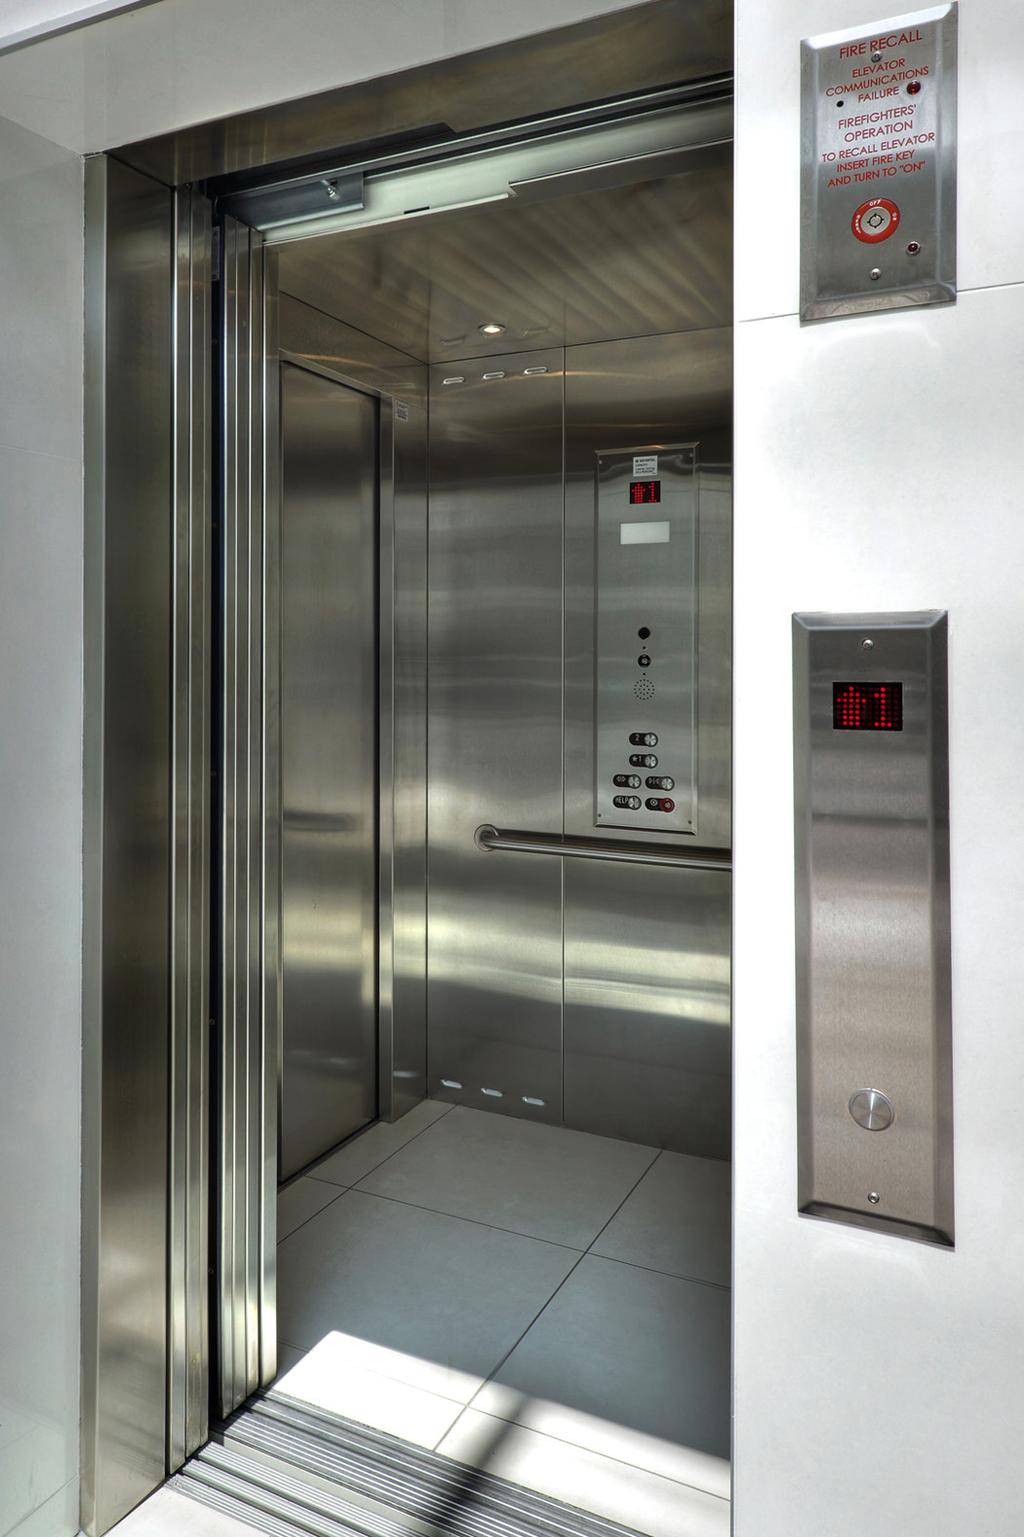 LU/LA ELEVATORS Commercial elevators LU/LA Biggest advantage Looks and feels like a commercial elevator Tip of the trade Stainless steel cab